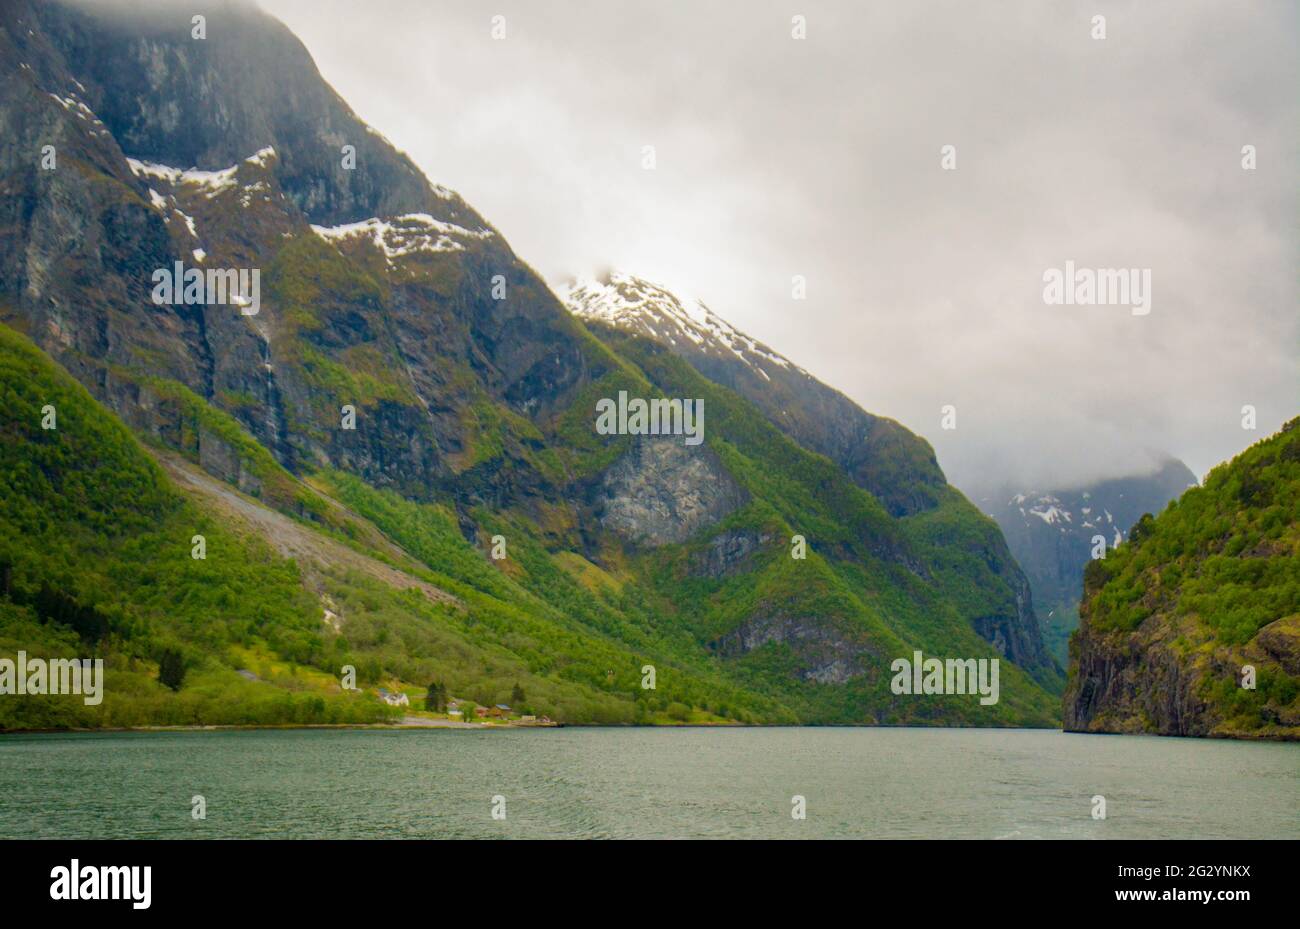 Large imposing mountains with snow capped peaks on either side of the fjord in Norway. Stock Photo